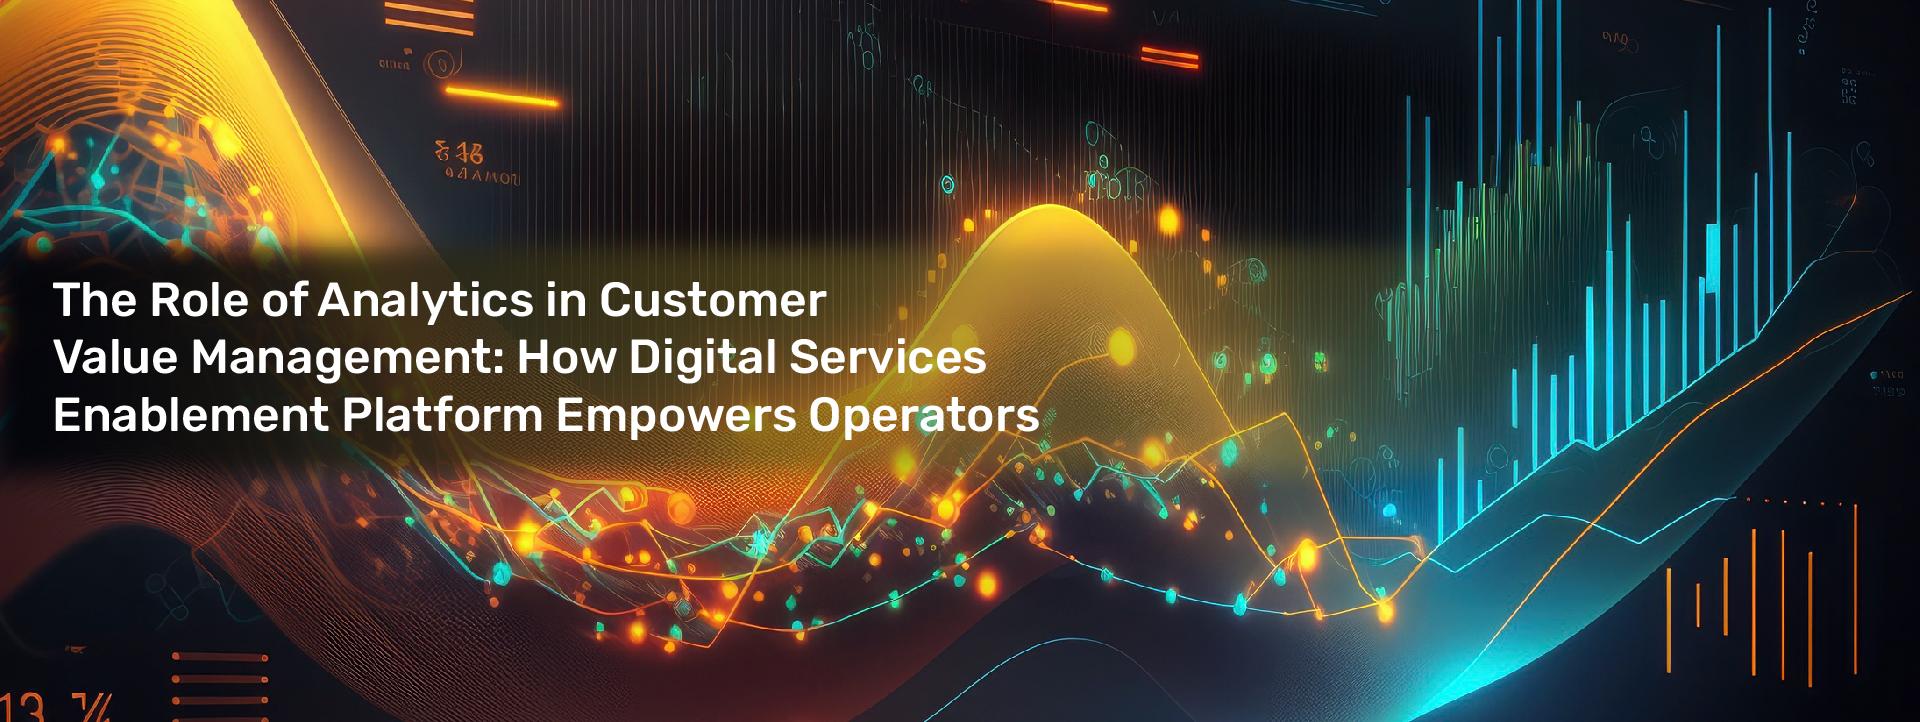 The Role of Analytics in Customer Value Management: How Digital Services Enablement Platform Empowers Operators